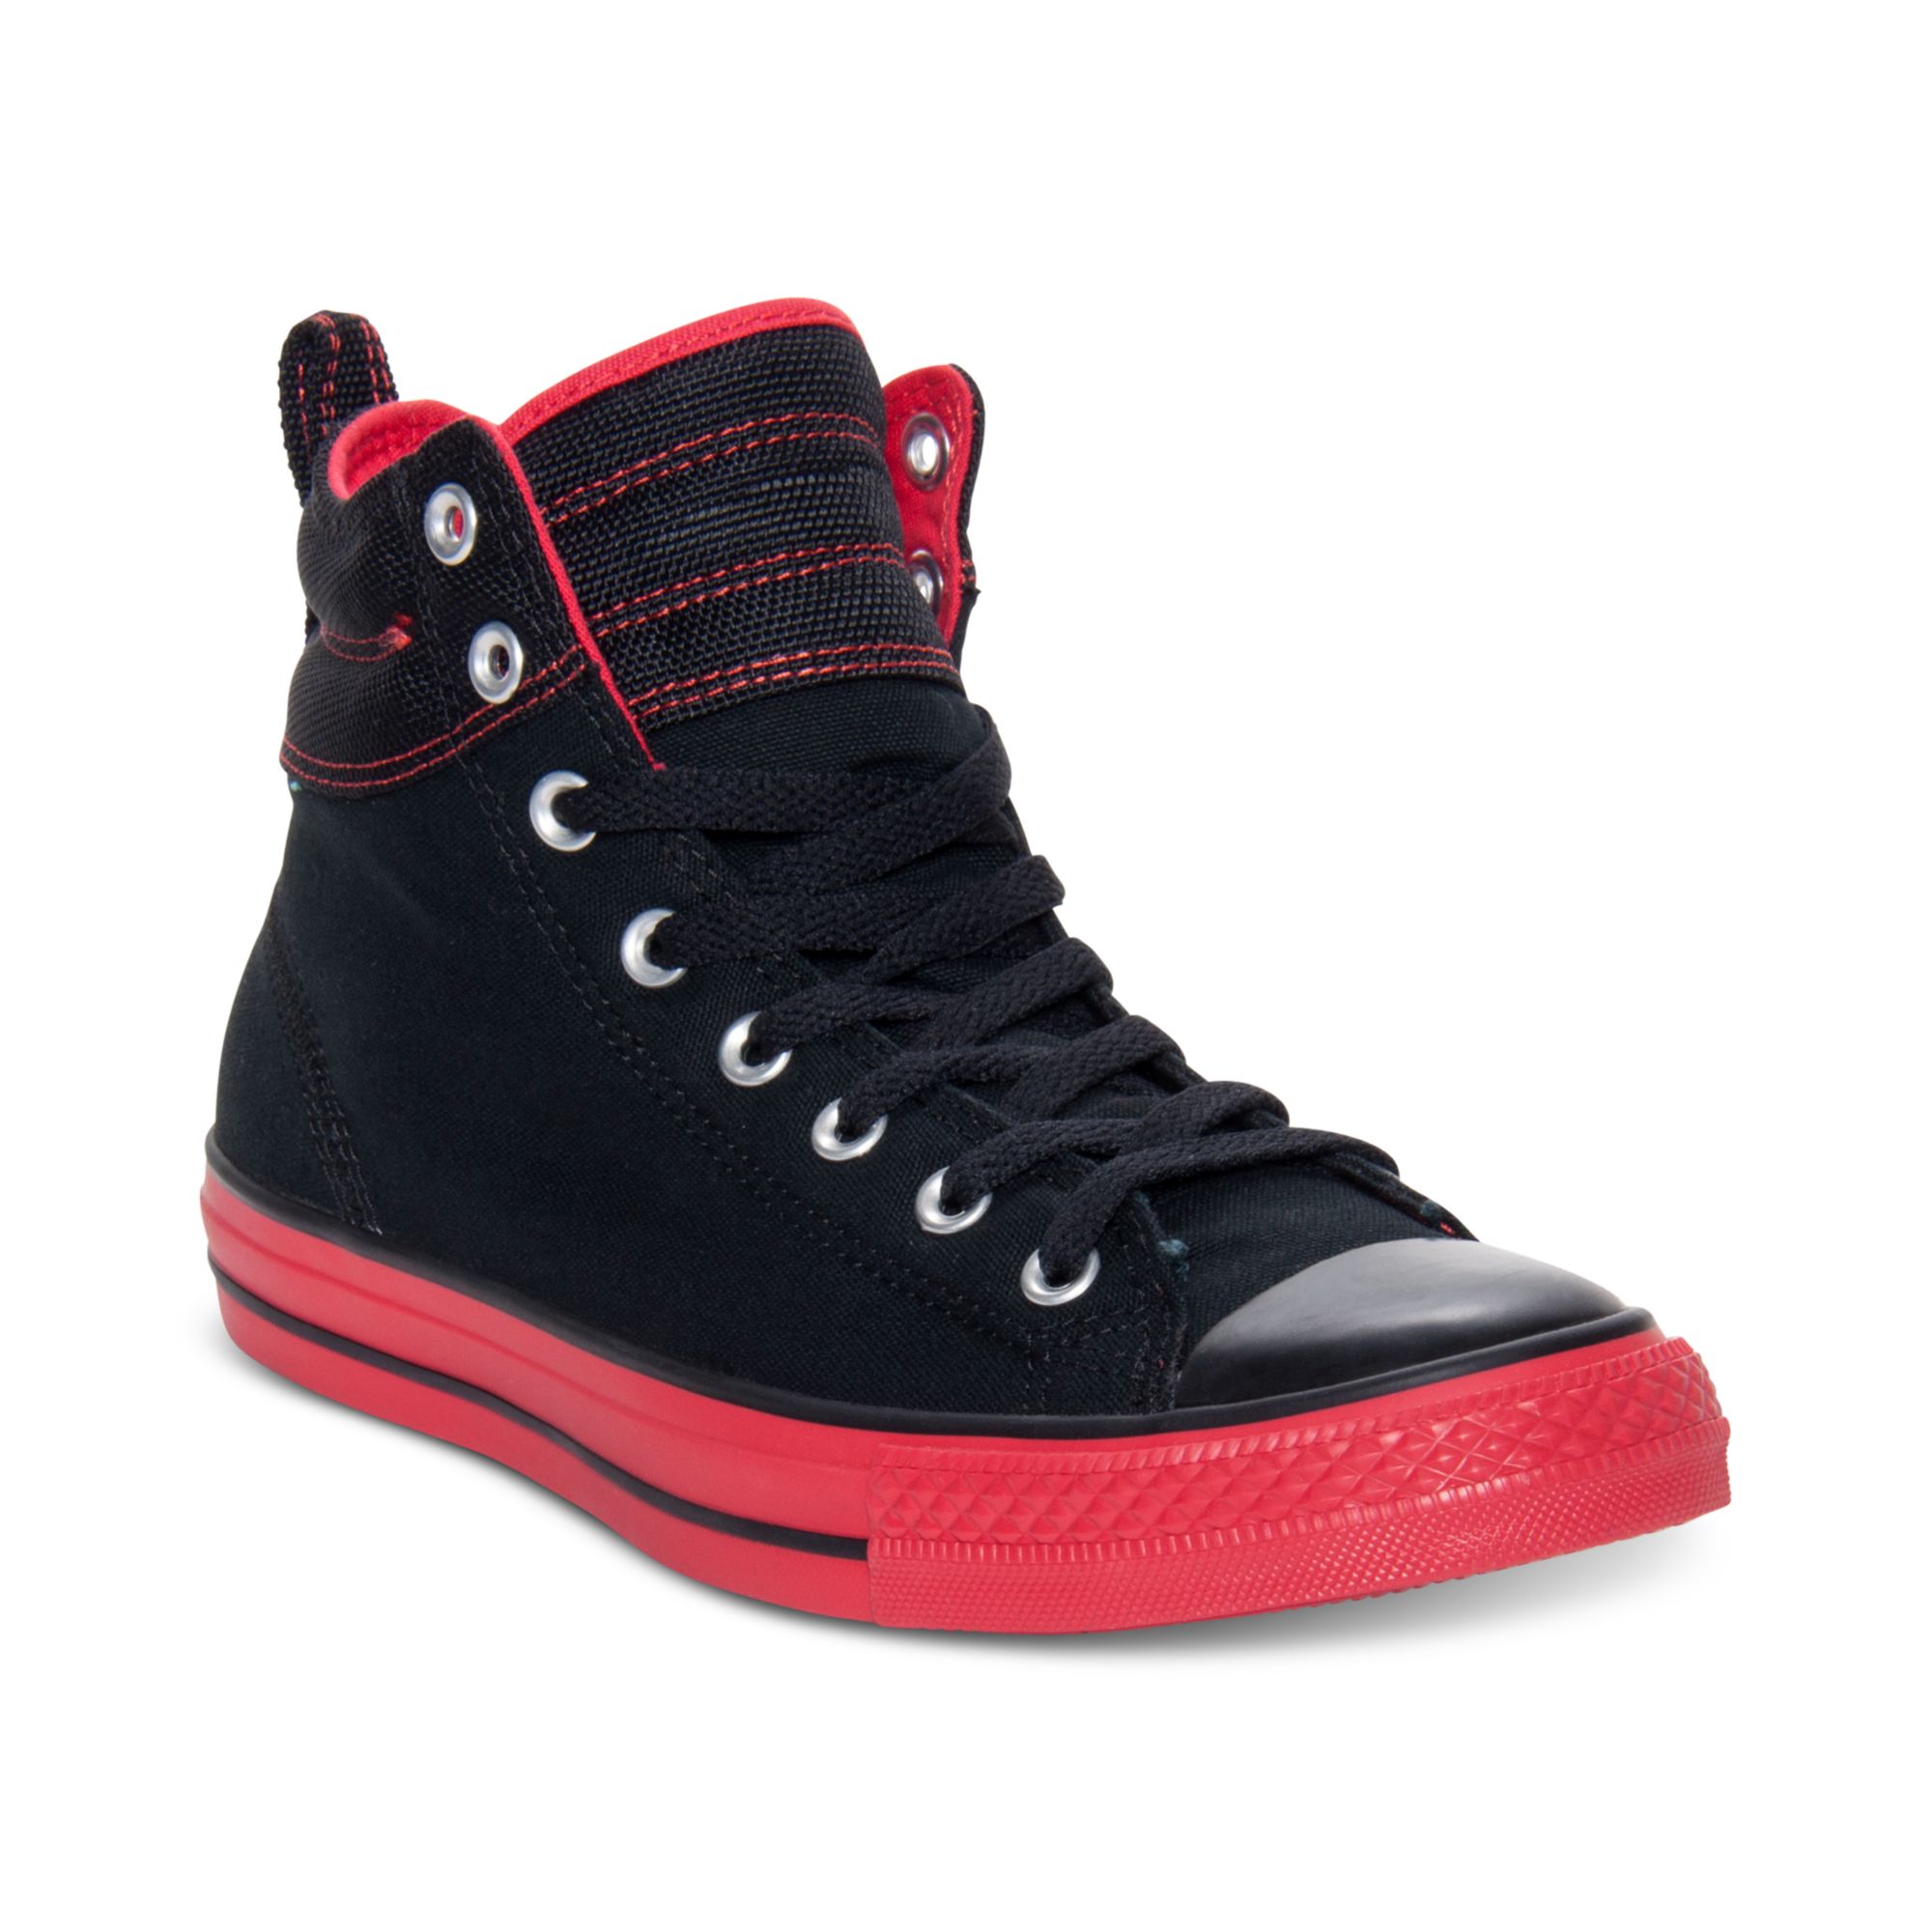 converse black and red high tops